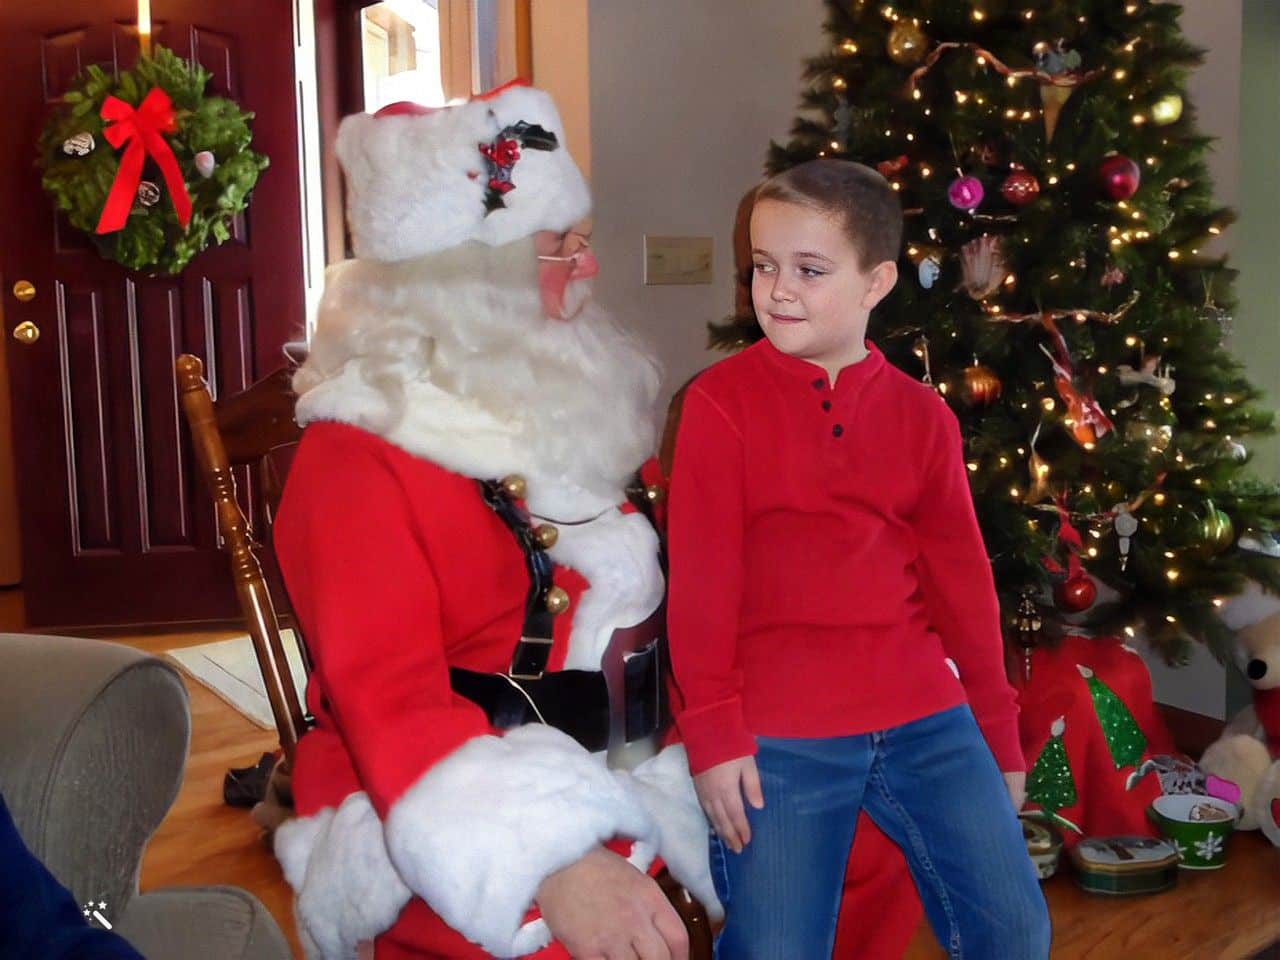 A boy gives Santa a good sizing up. Photo enhanced and colors restored by MyHeritage